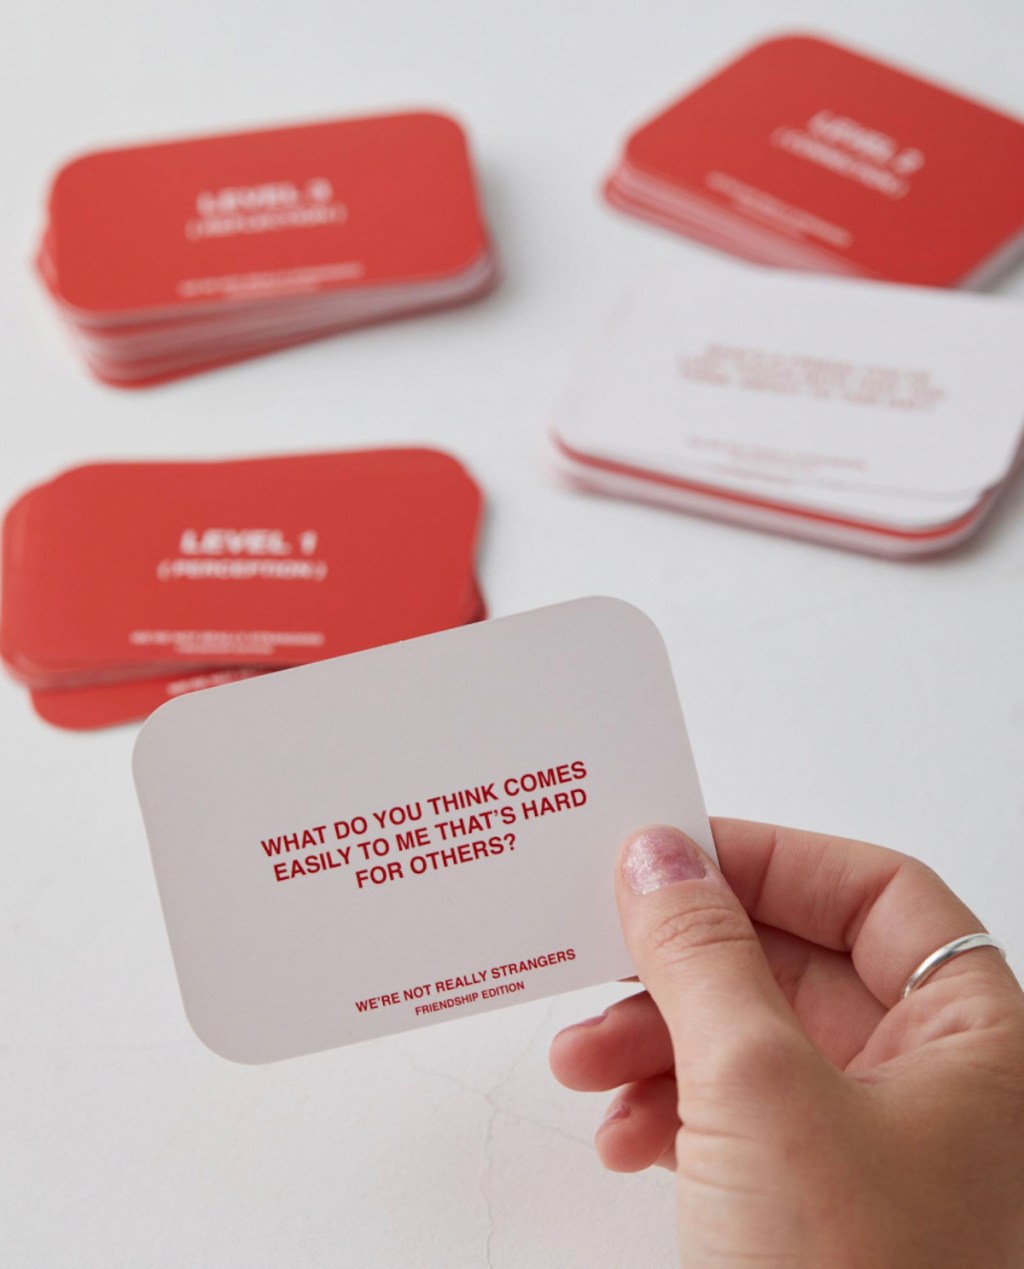 hand holding a red and white question card in front of decks of cards on white table